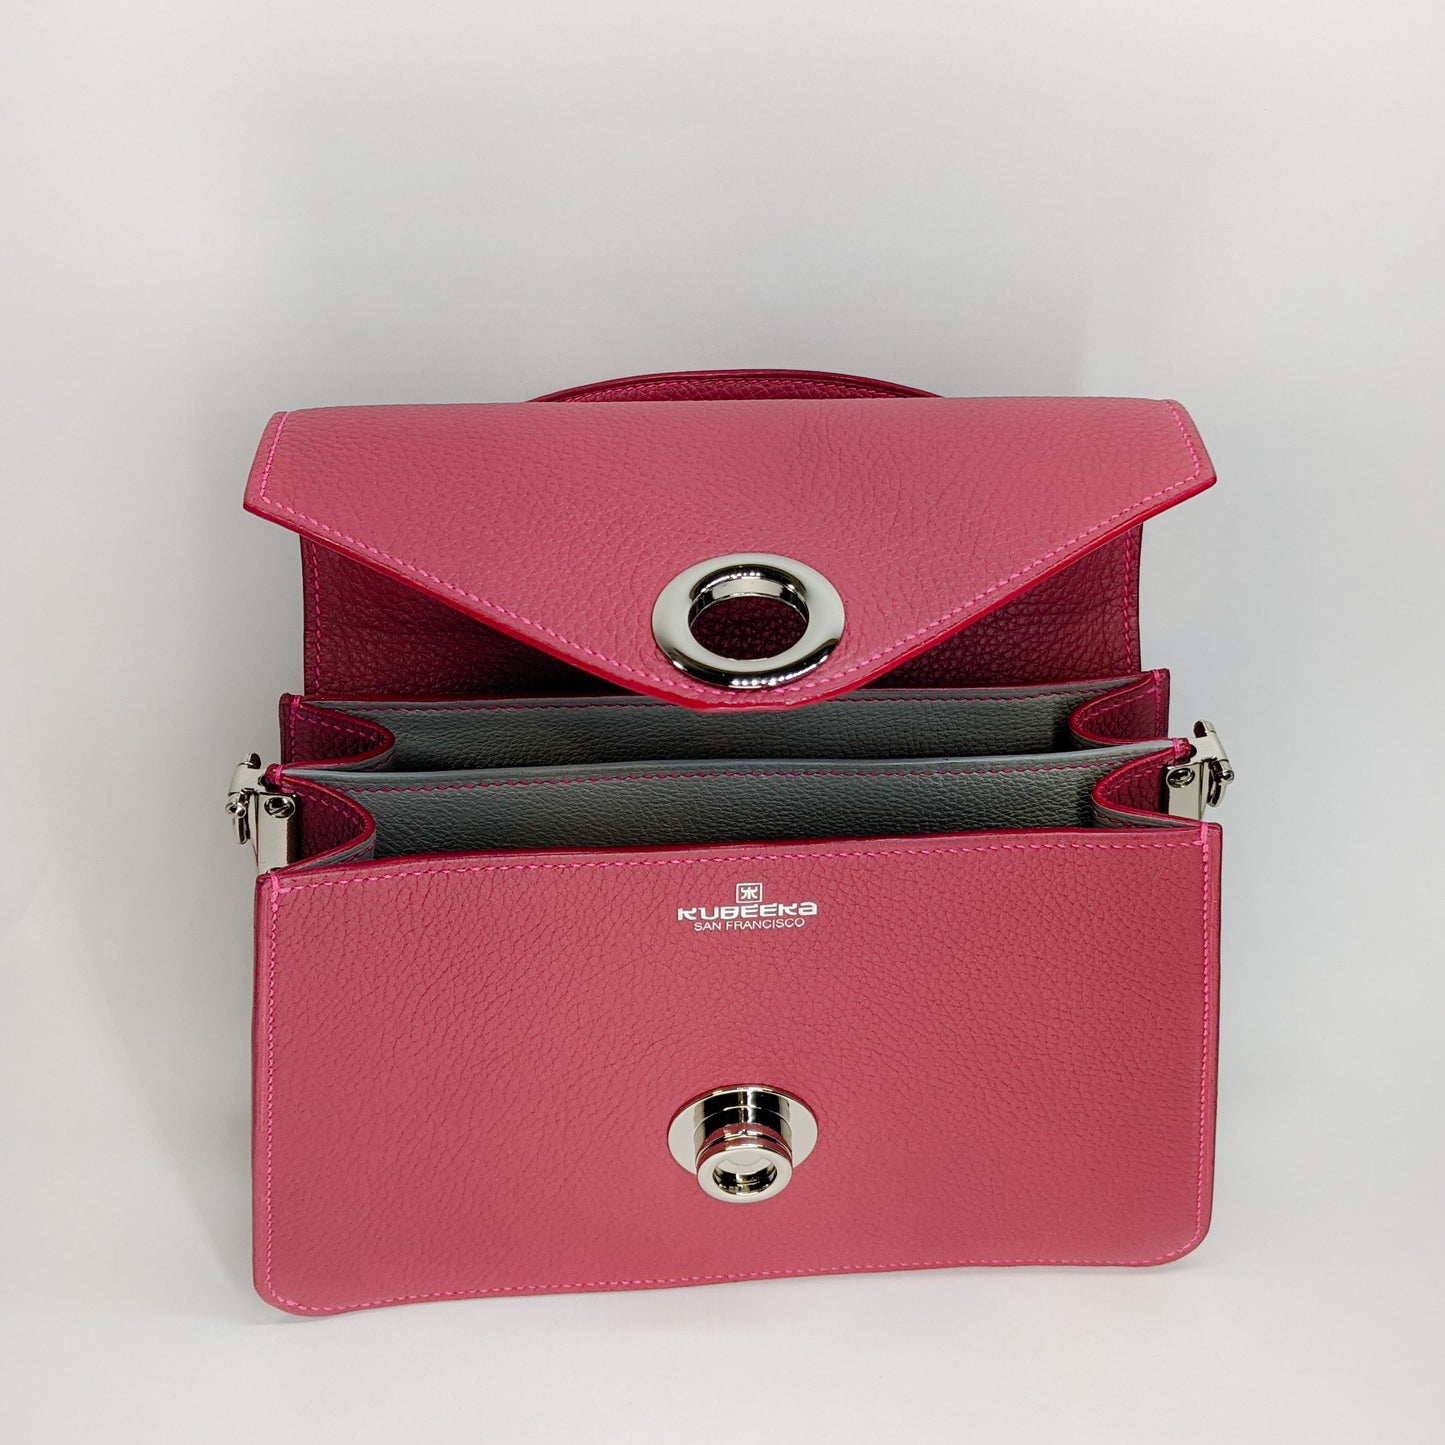 Mary Pink with Shoulder Strap by Kubeeka